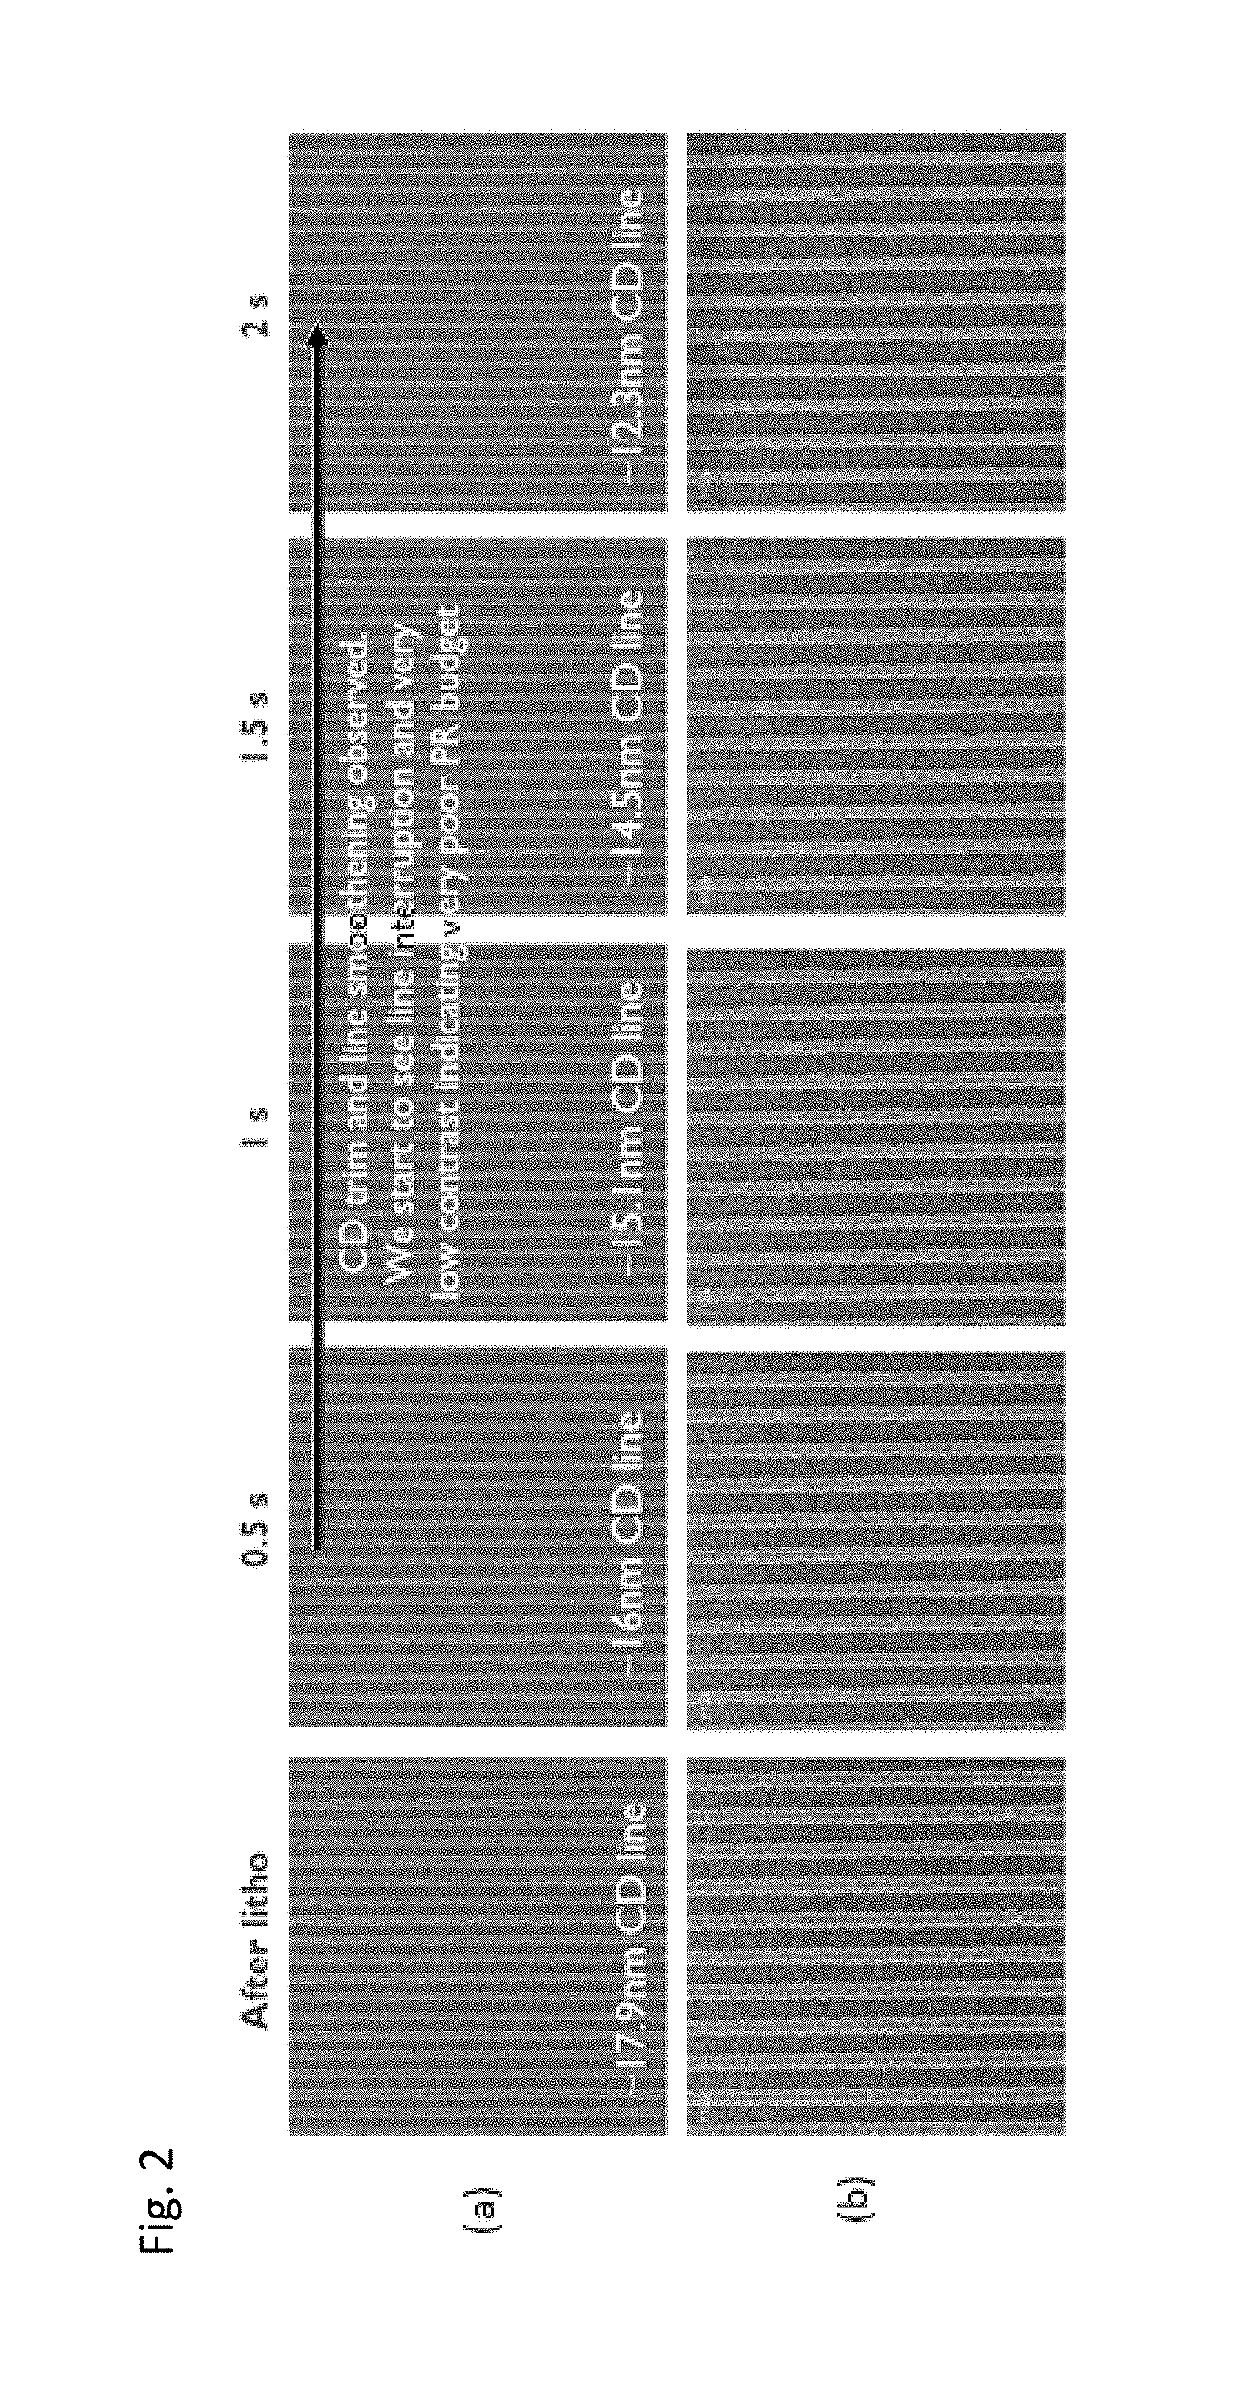 Method of spacer-defined direct patterning in semiconductor fabrication